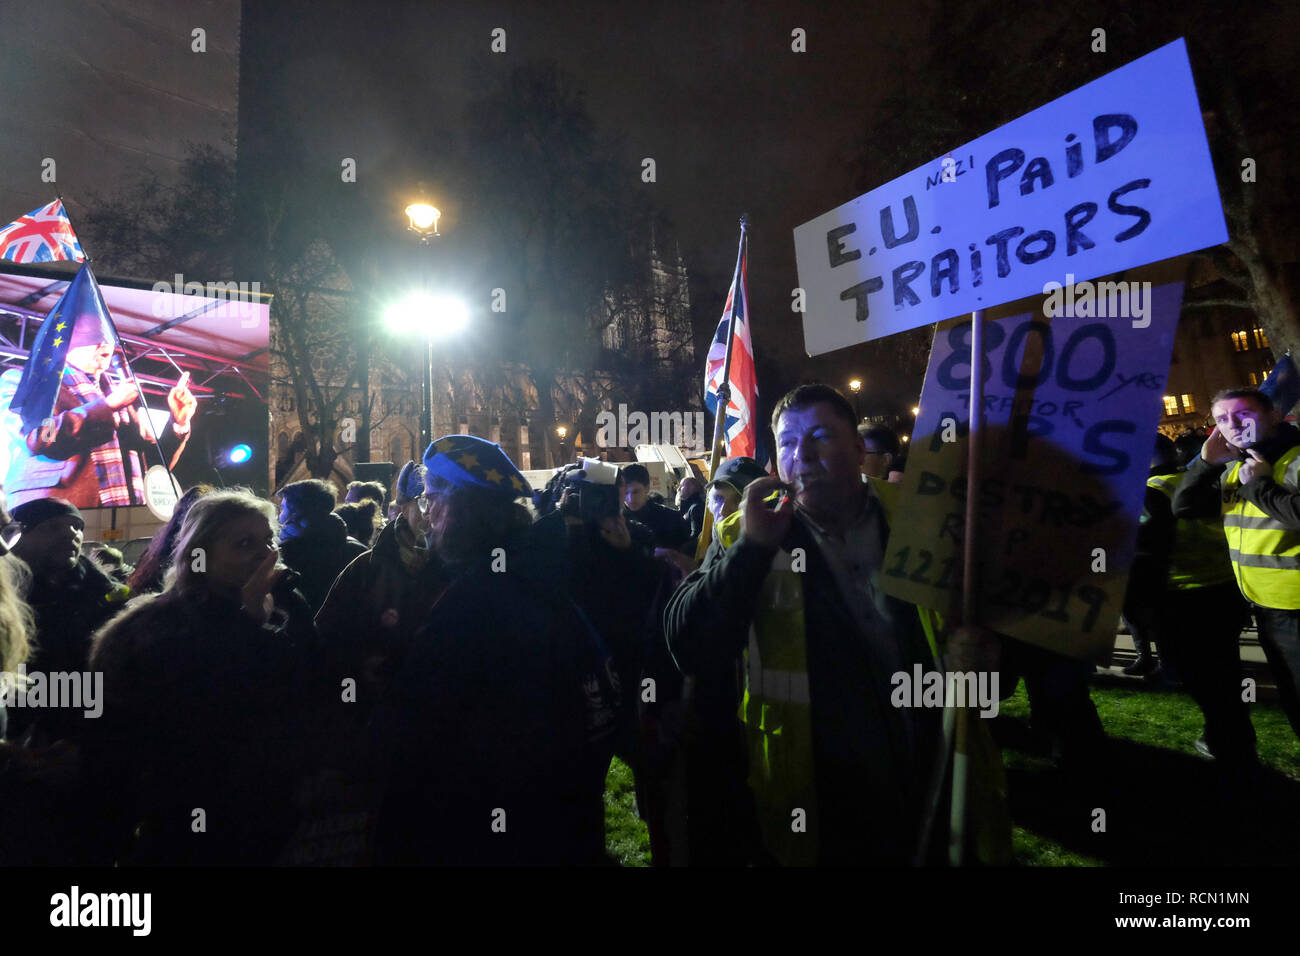 London, UK. 15th Jan 2019. Leave and Remain supporters as well as politicians, media and religious doomsayers gather outside Parliamnet Credit: Rachel Megawhat/Alamy Live News Stock Photo